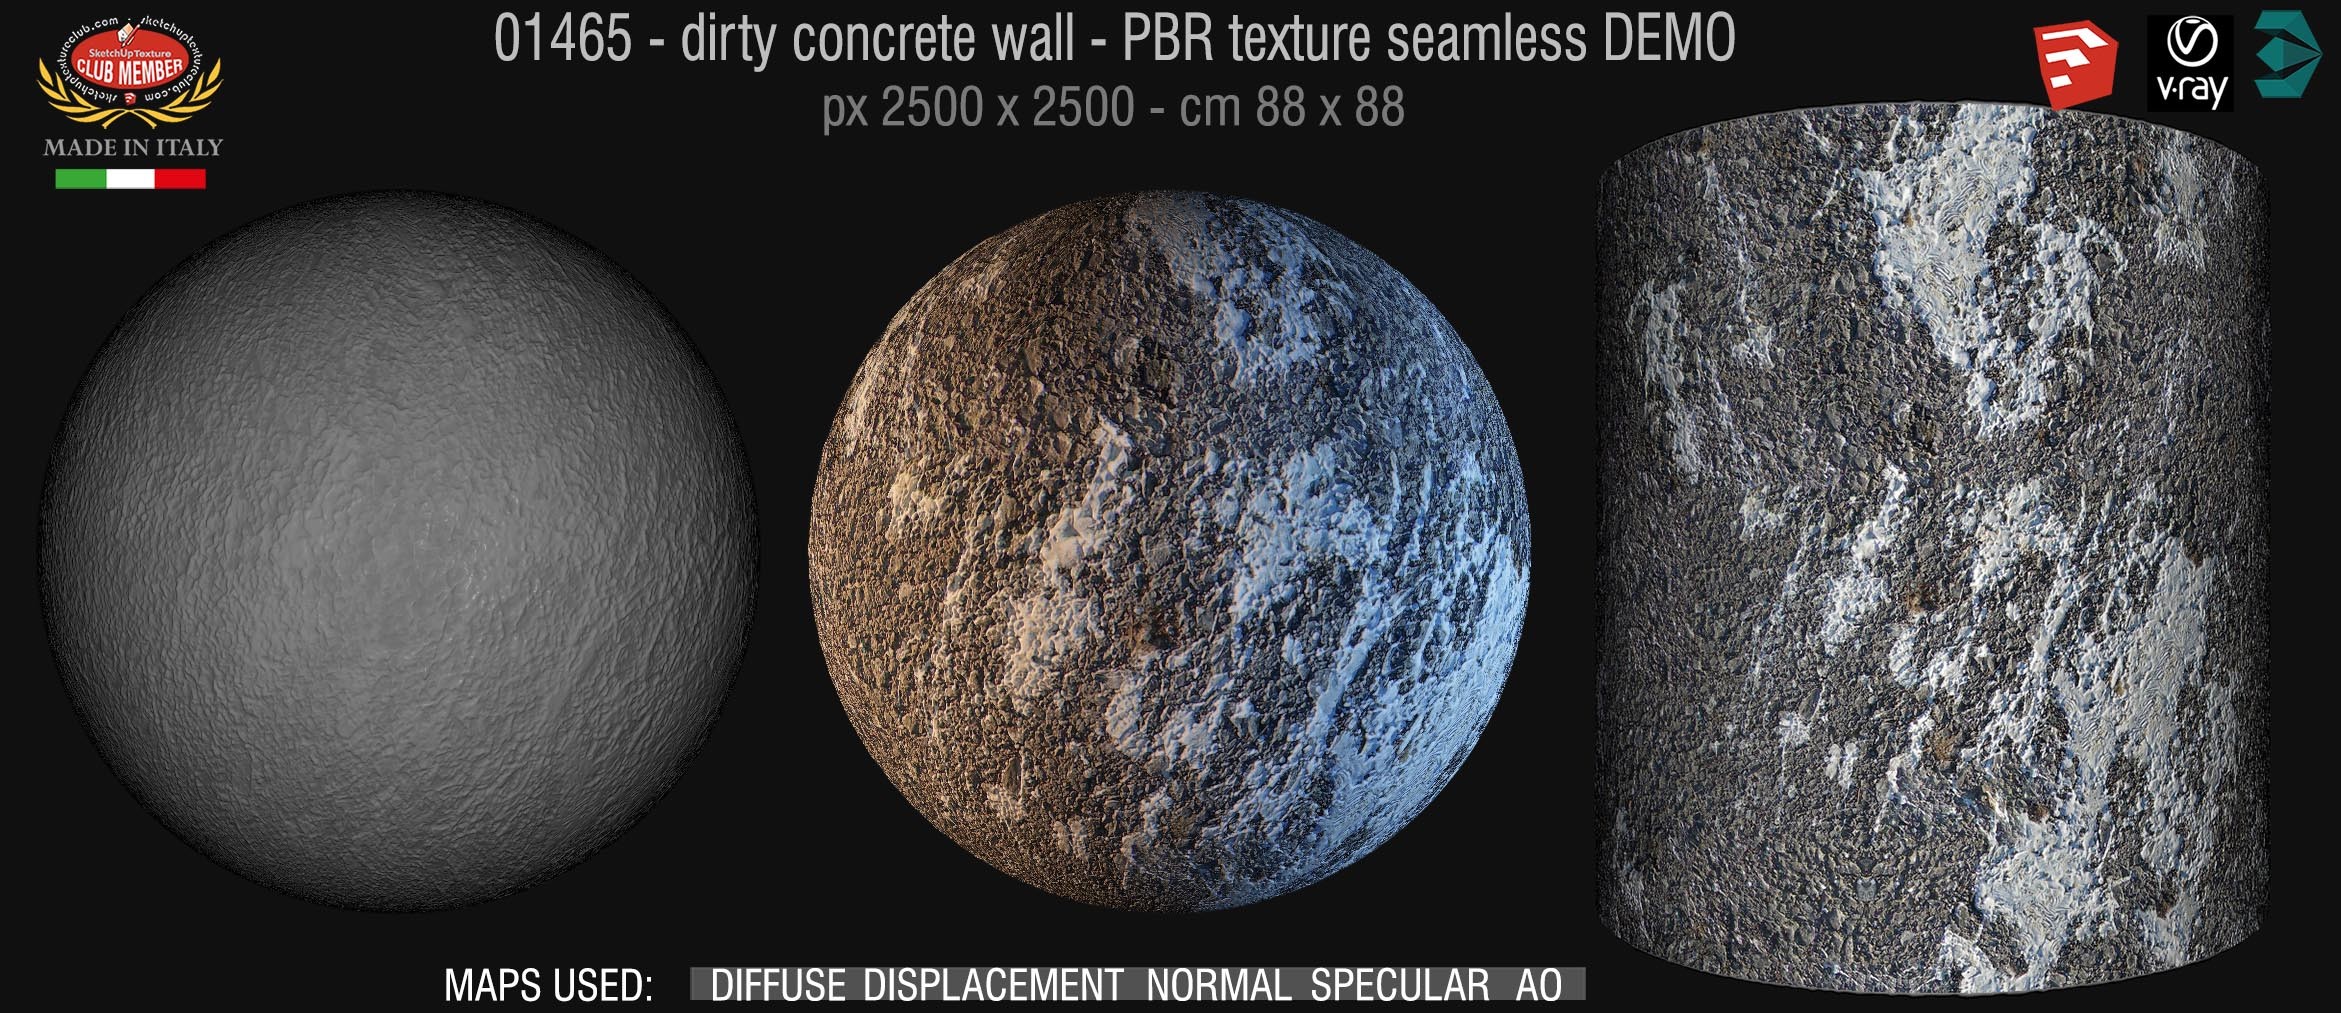 01465 Concrete bare dirty wall PBR texture seamless DEMO